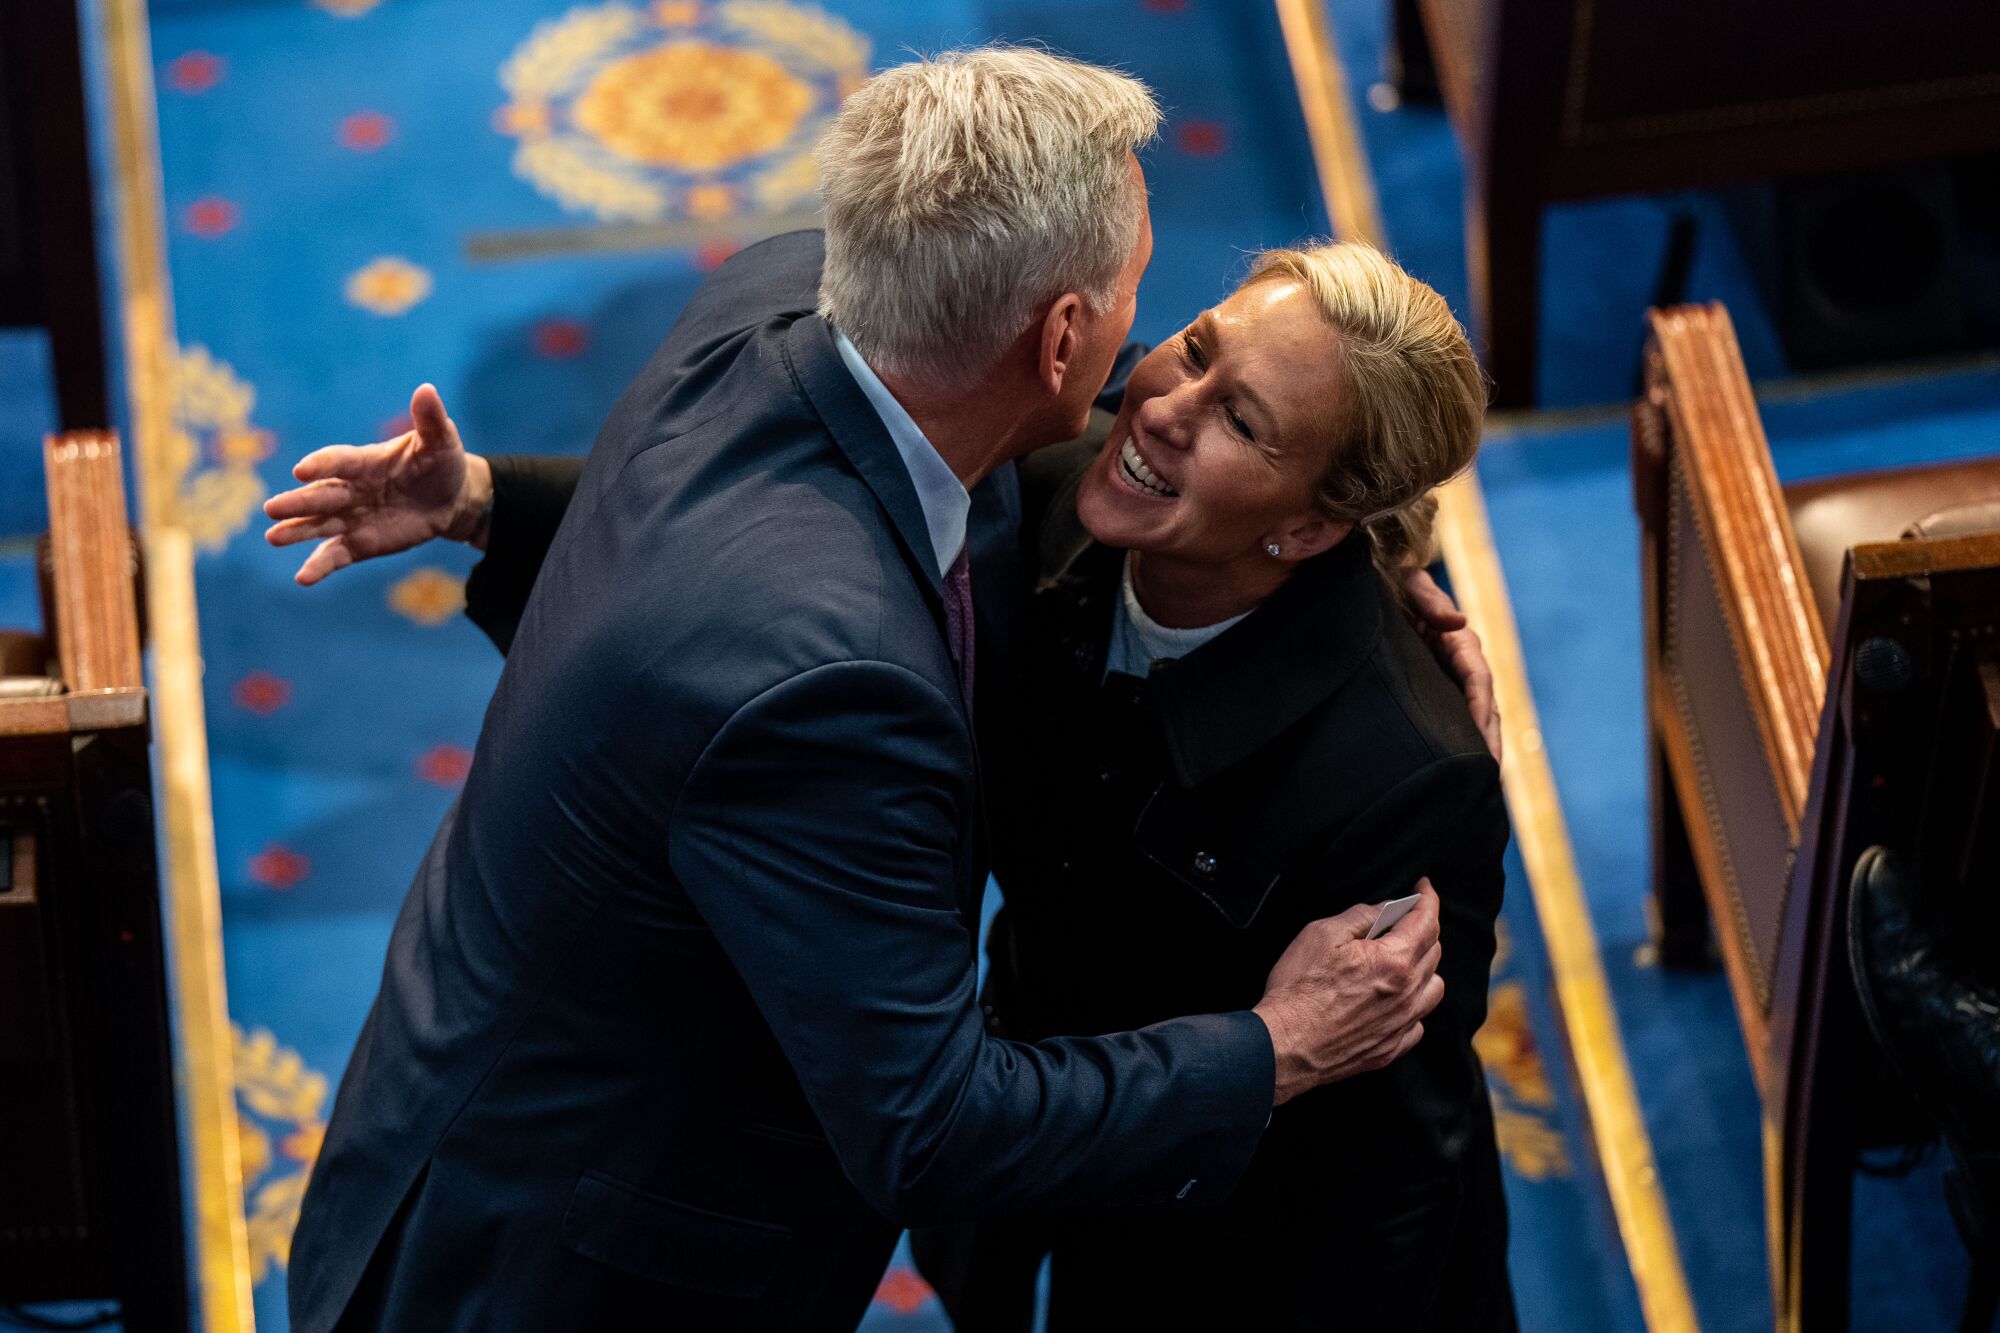  Kevin McCarthy hugs Rep. Marjorie Taylor Greene on the floor of the House Chamber Friday.